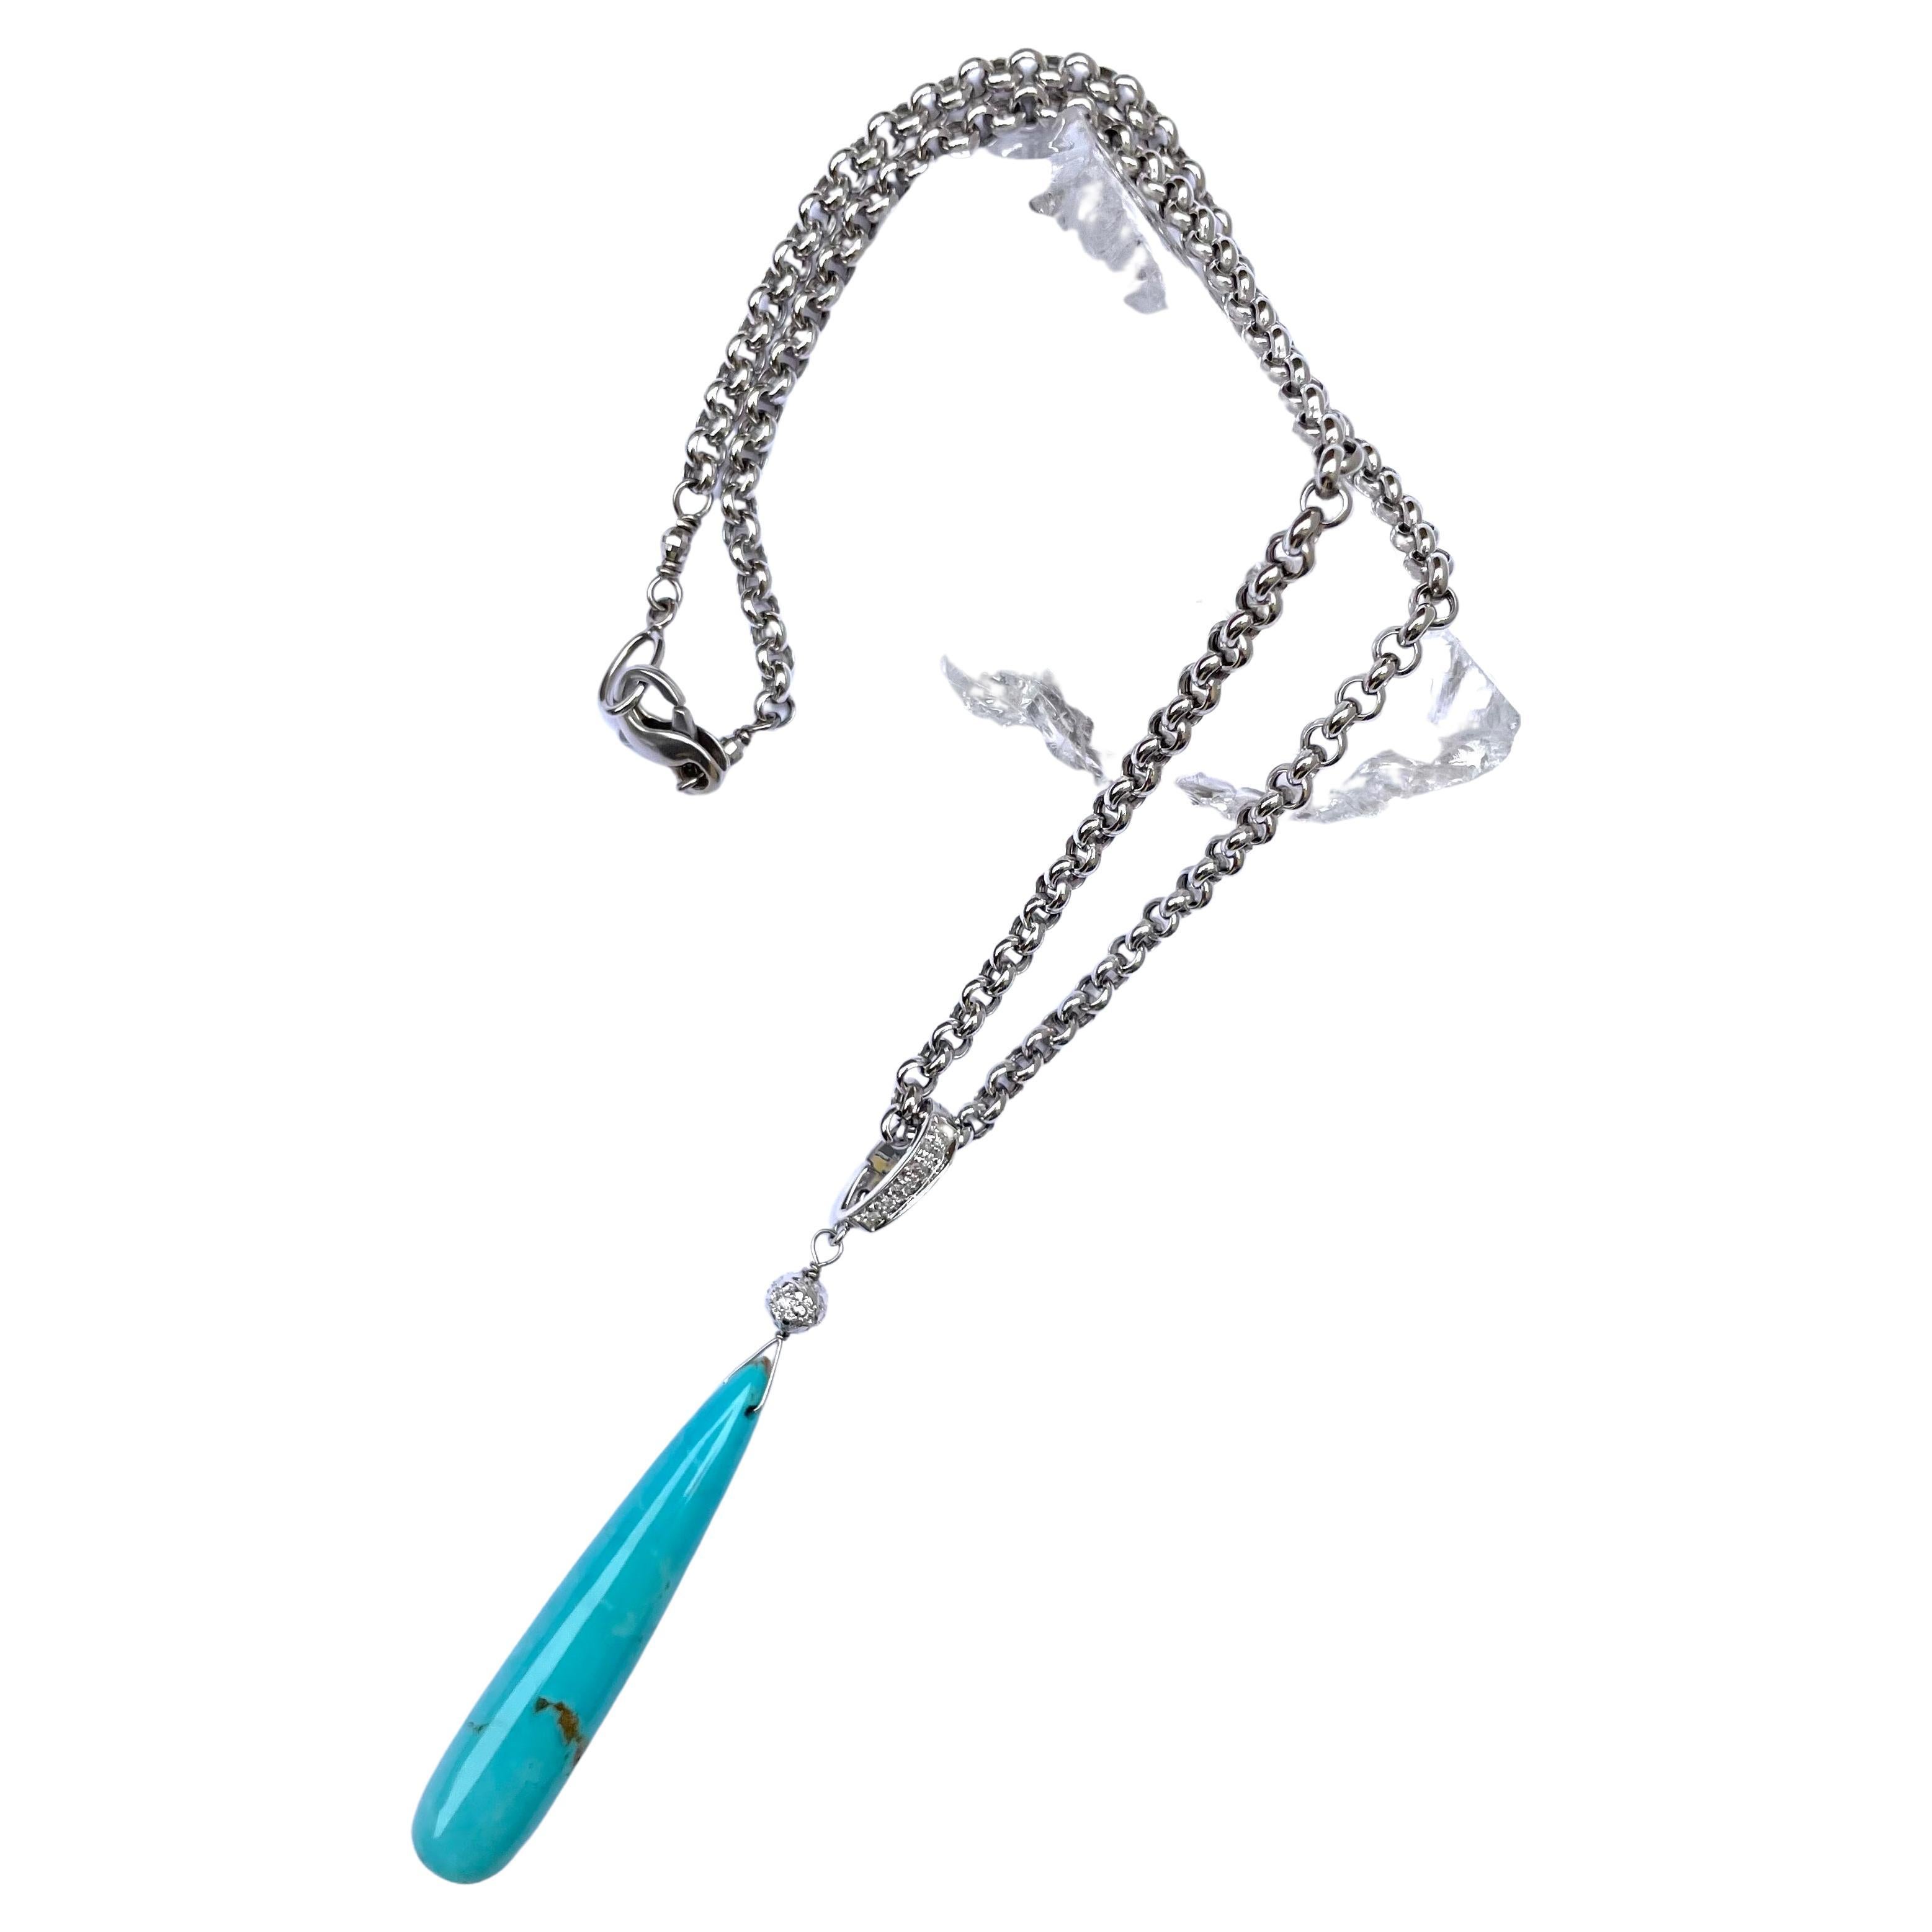 Sleeping Beauty Turquoise with Diamonds Chain Necklace In New Condition For Sale In Laguna Beach, CA